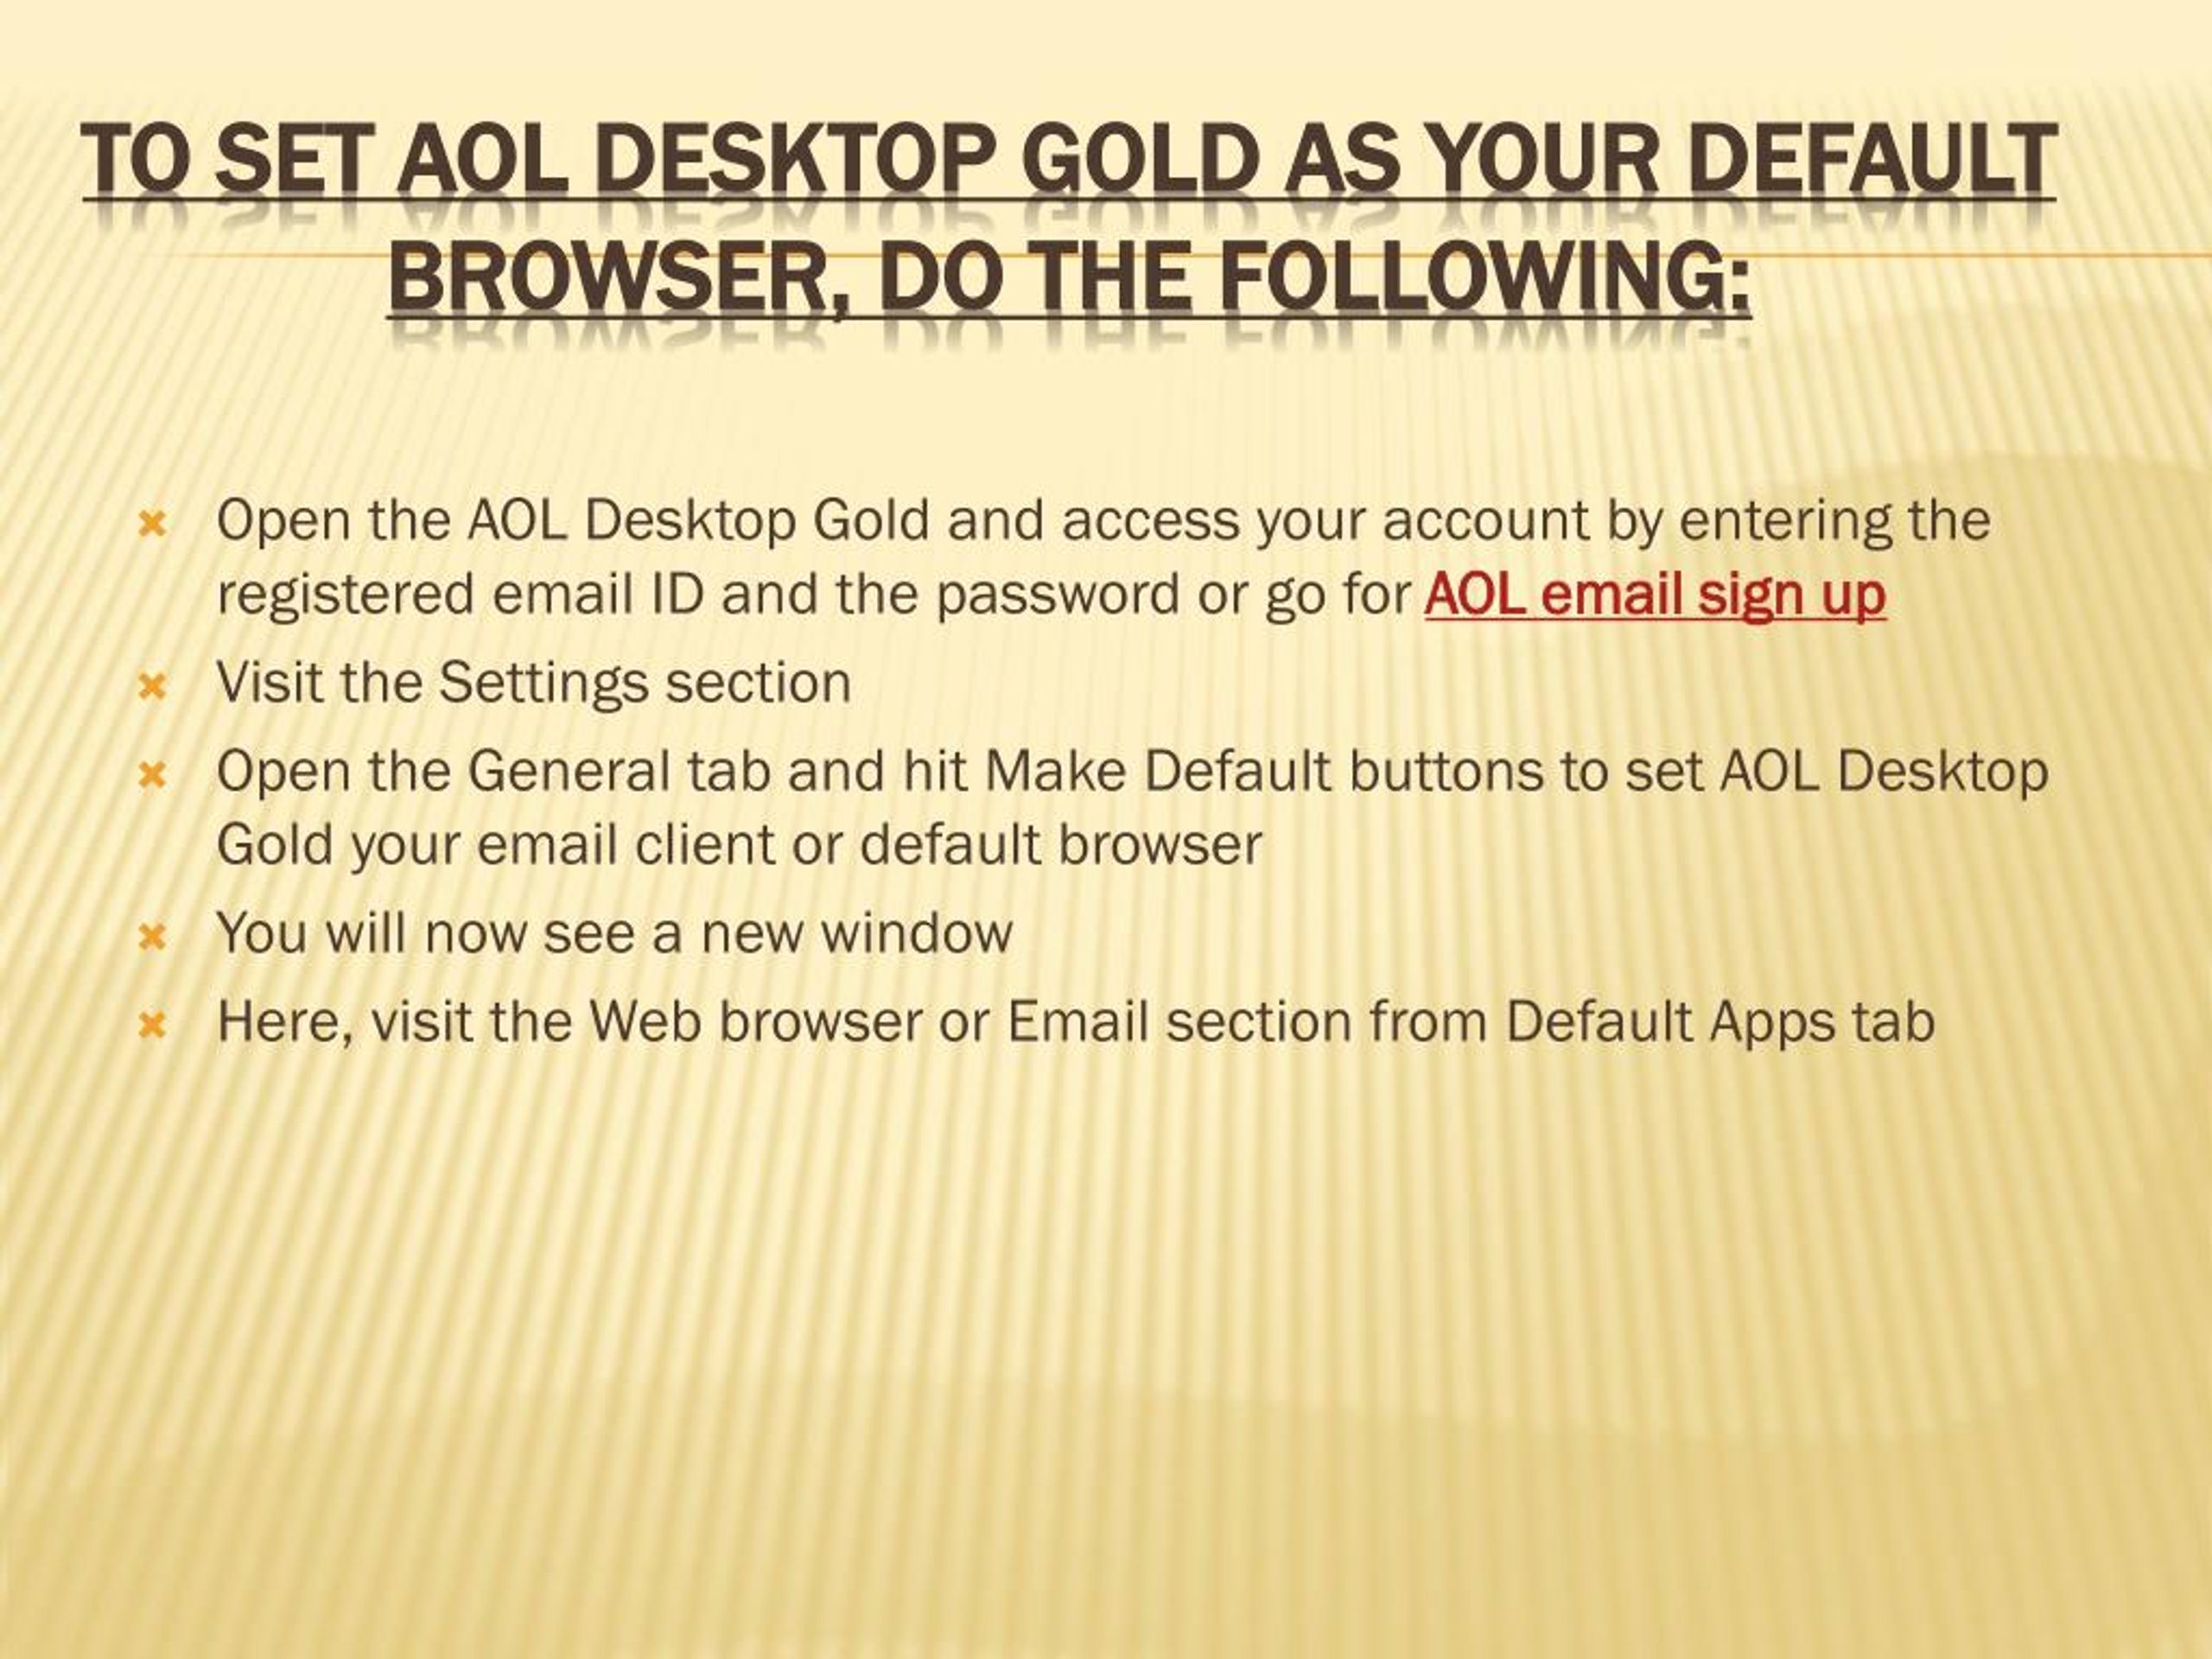 do i need a browser for aol desktop gold